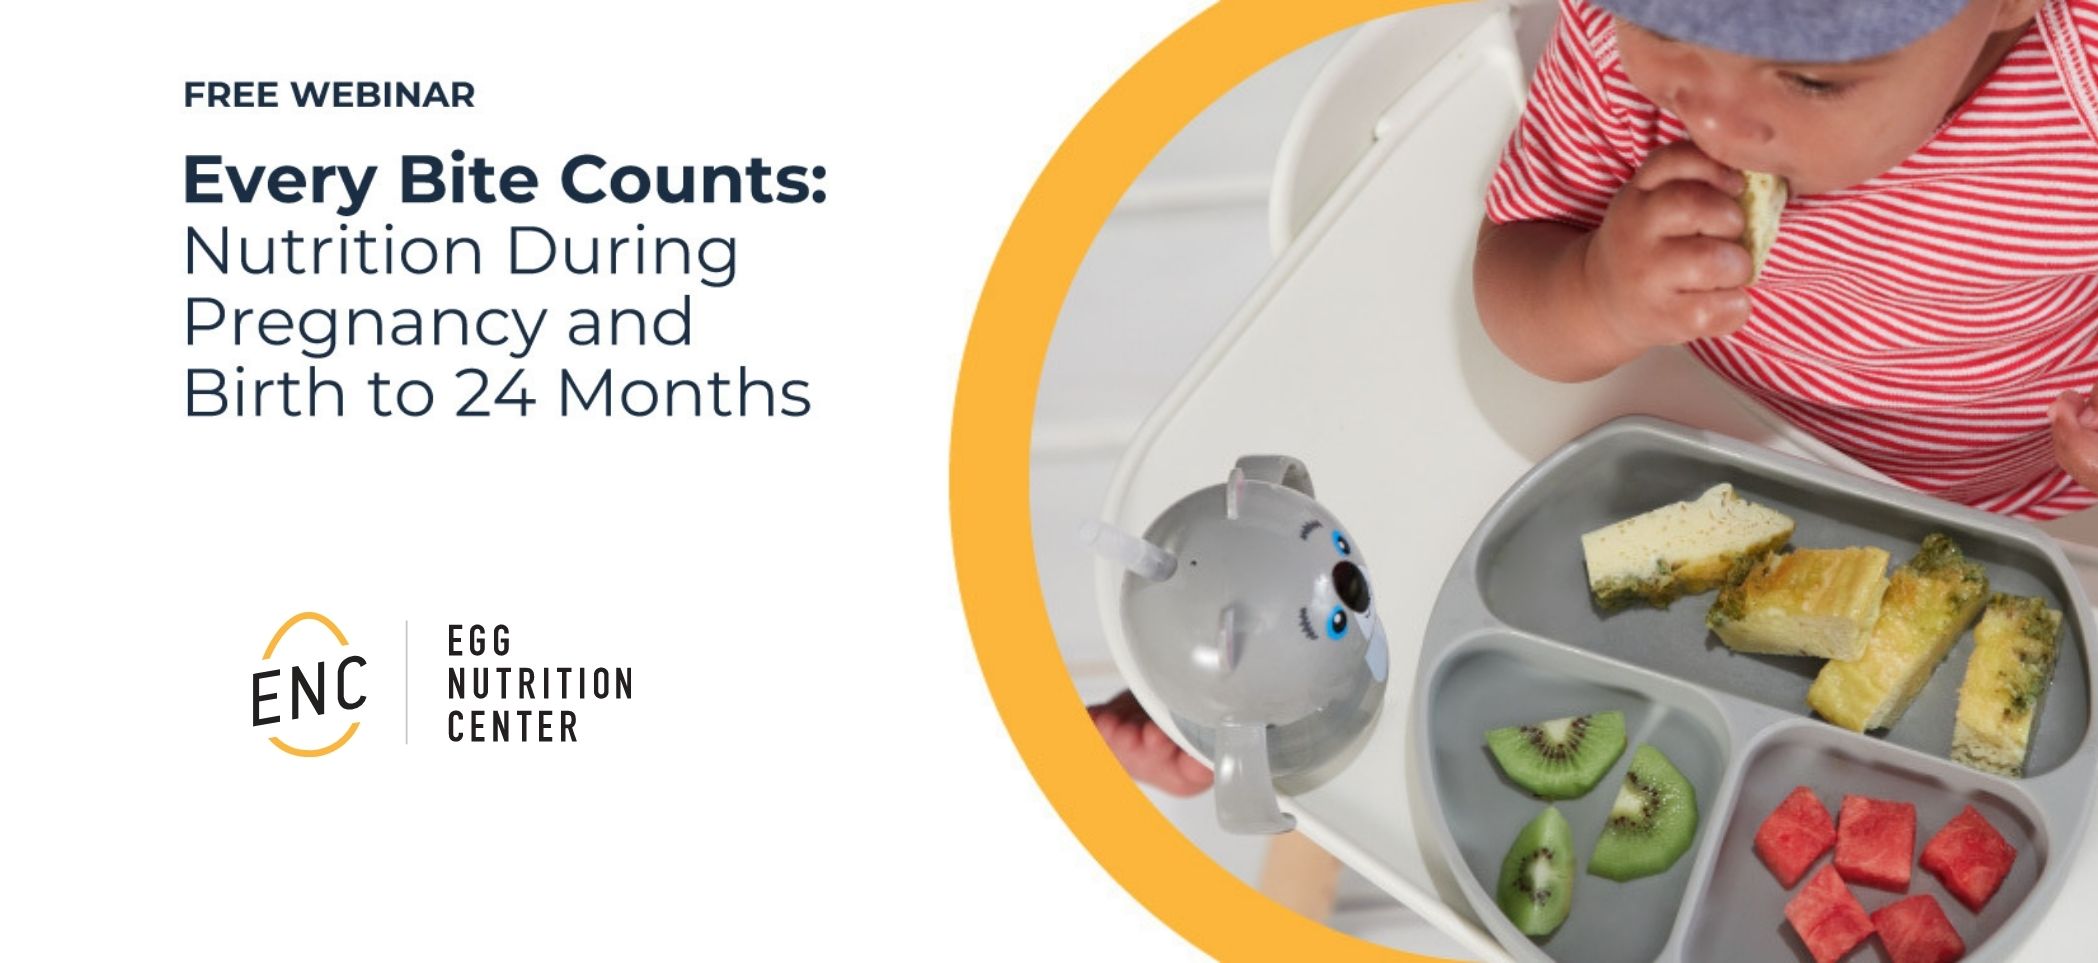 Every bite counts: Nutrition during pregnancy and birth to 24 months